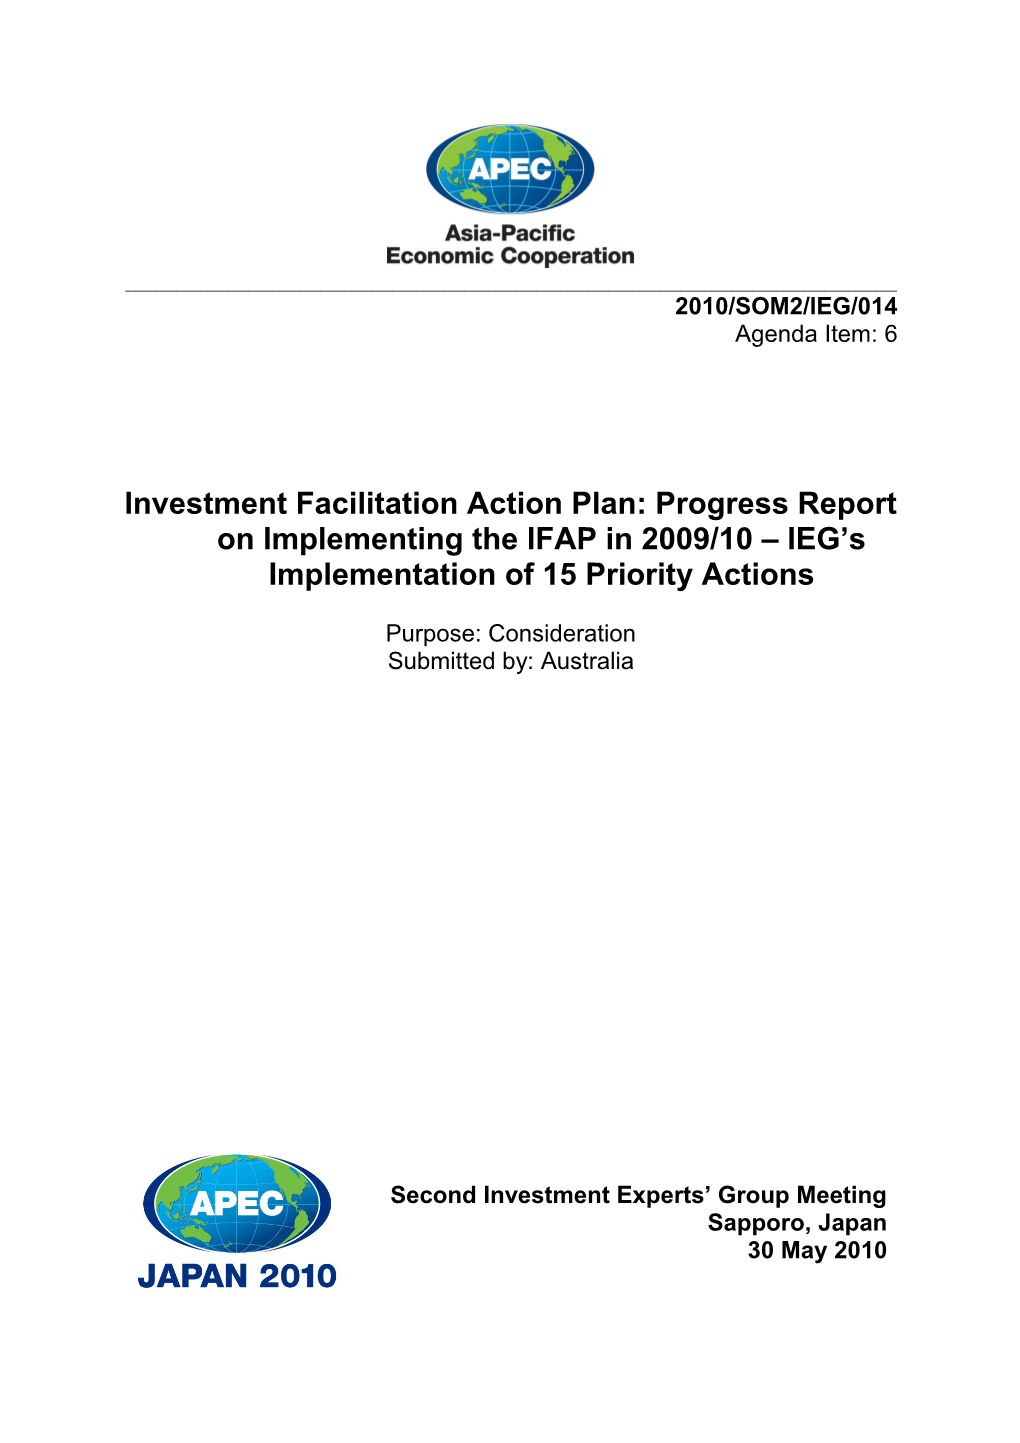 Investment Facilitation Action Plan: Progress Report on Implementing the IFAP in 2009/10